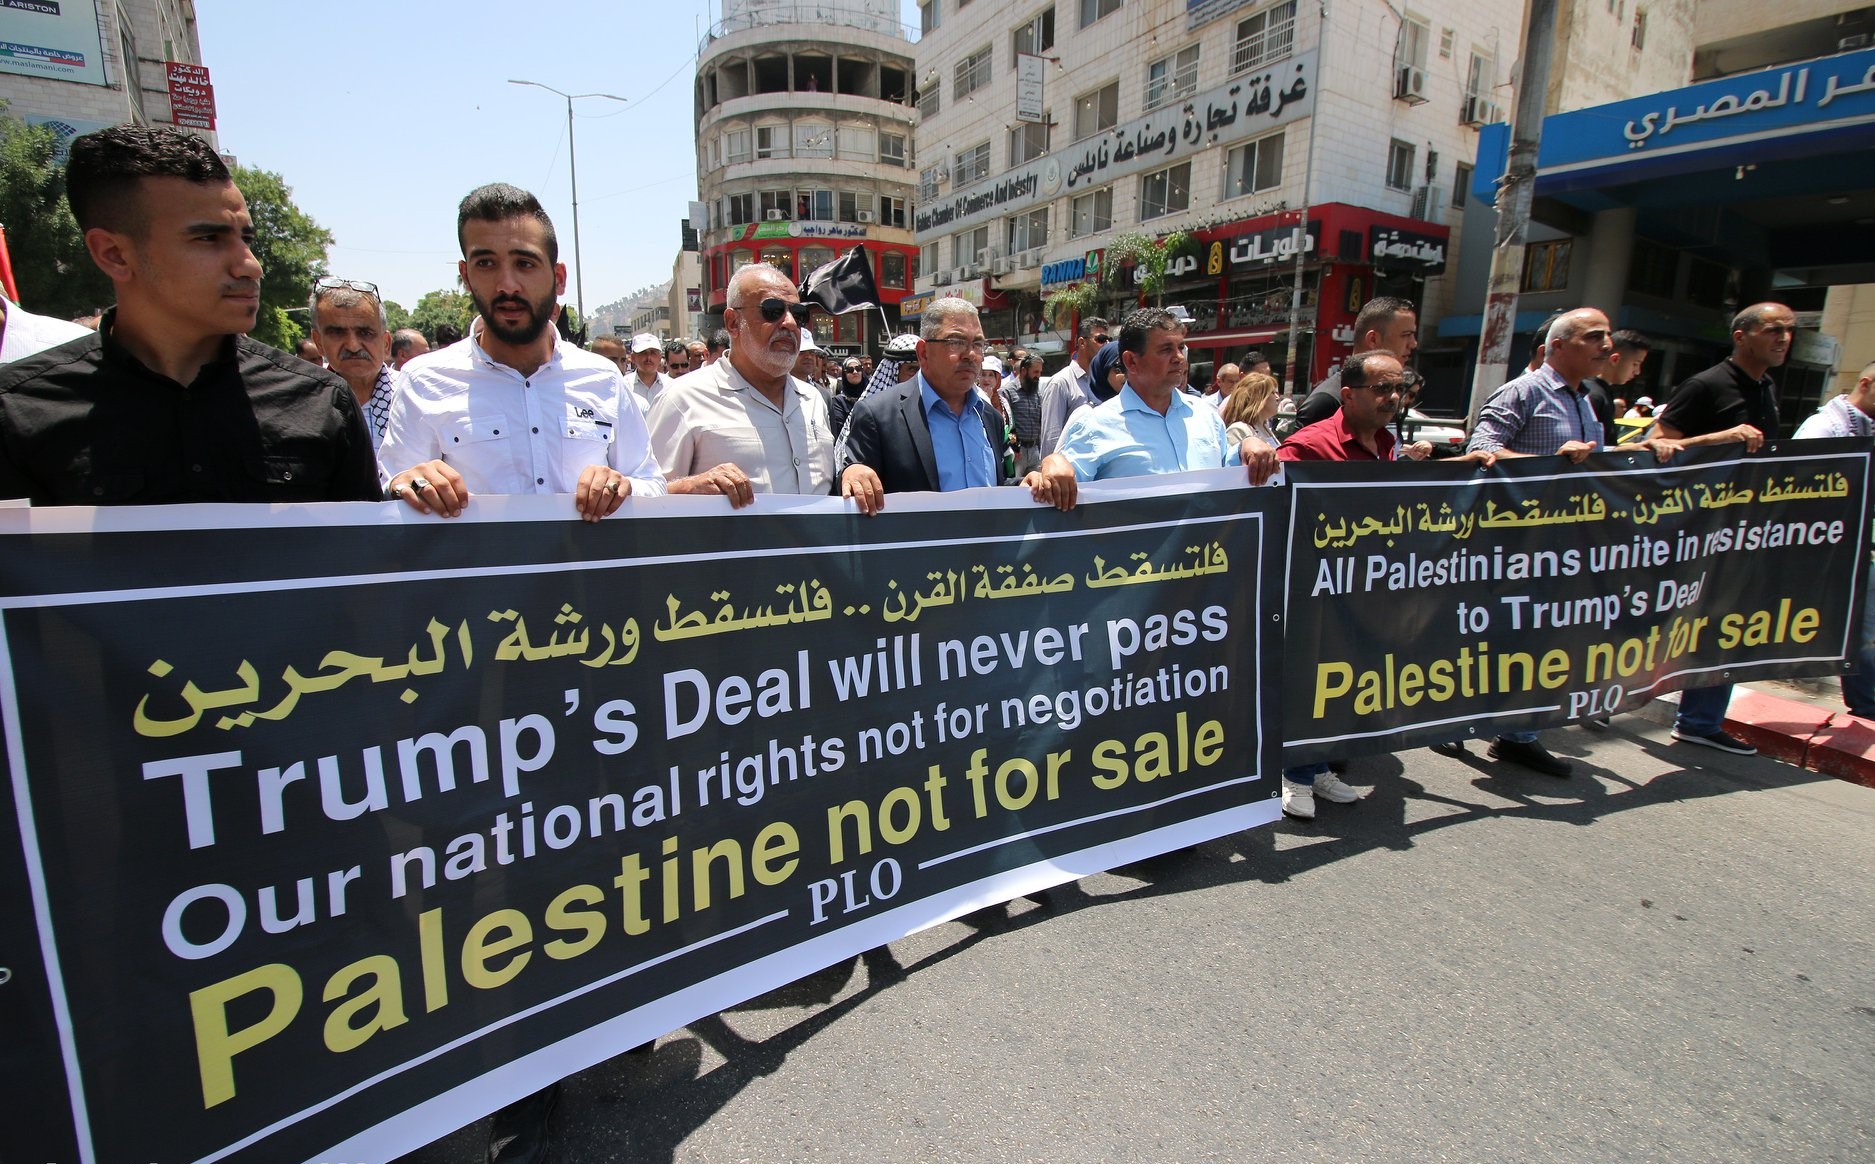 Palestinians demonstrate in Ramallah in late June 2019 during the then ongoing "Peace to Prosperity" workshop, initiated by the Trump administration, taking place in Bahrain. The slogan in Arabic at the top of the banners reads: "Down with the Deal of the Century.. Down with the Bahrain Workshop."